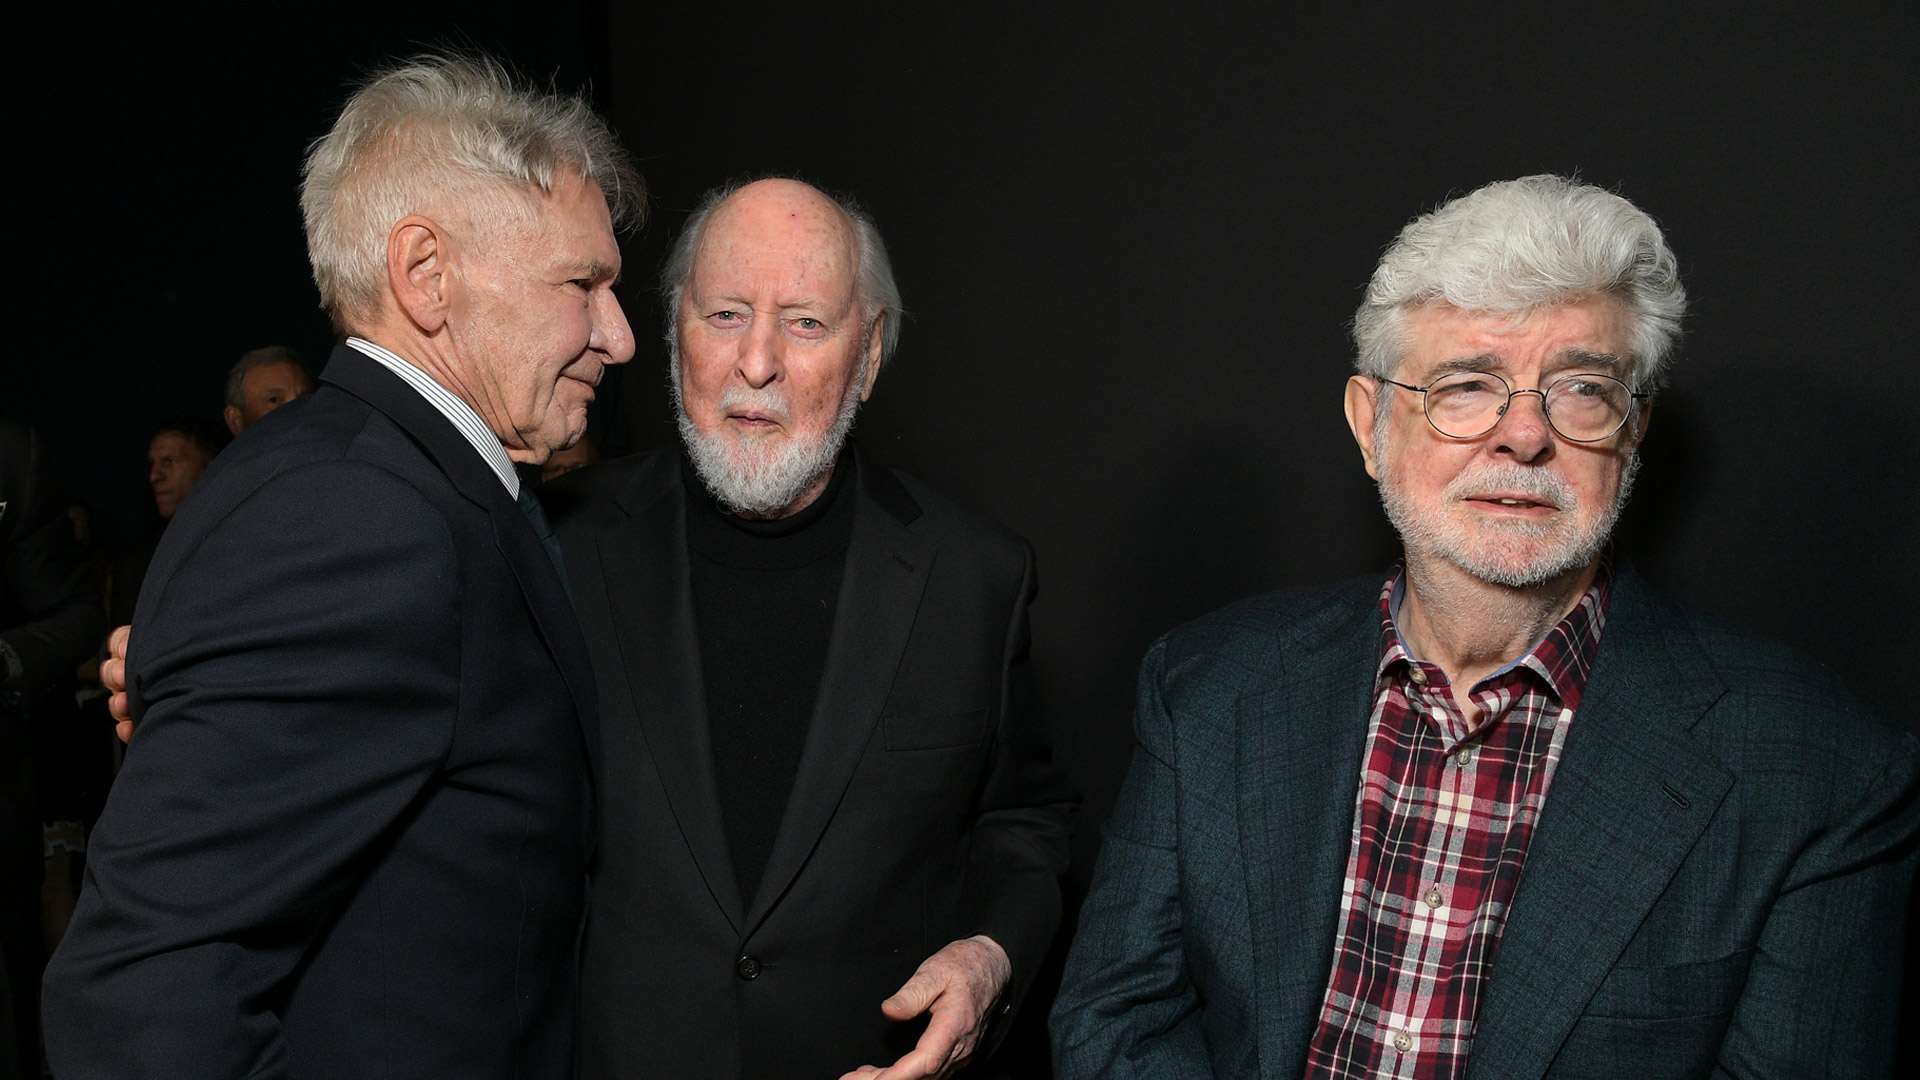 Harrison Ford, George Lucas, and John Williams at the U.S. premiere red carpet